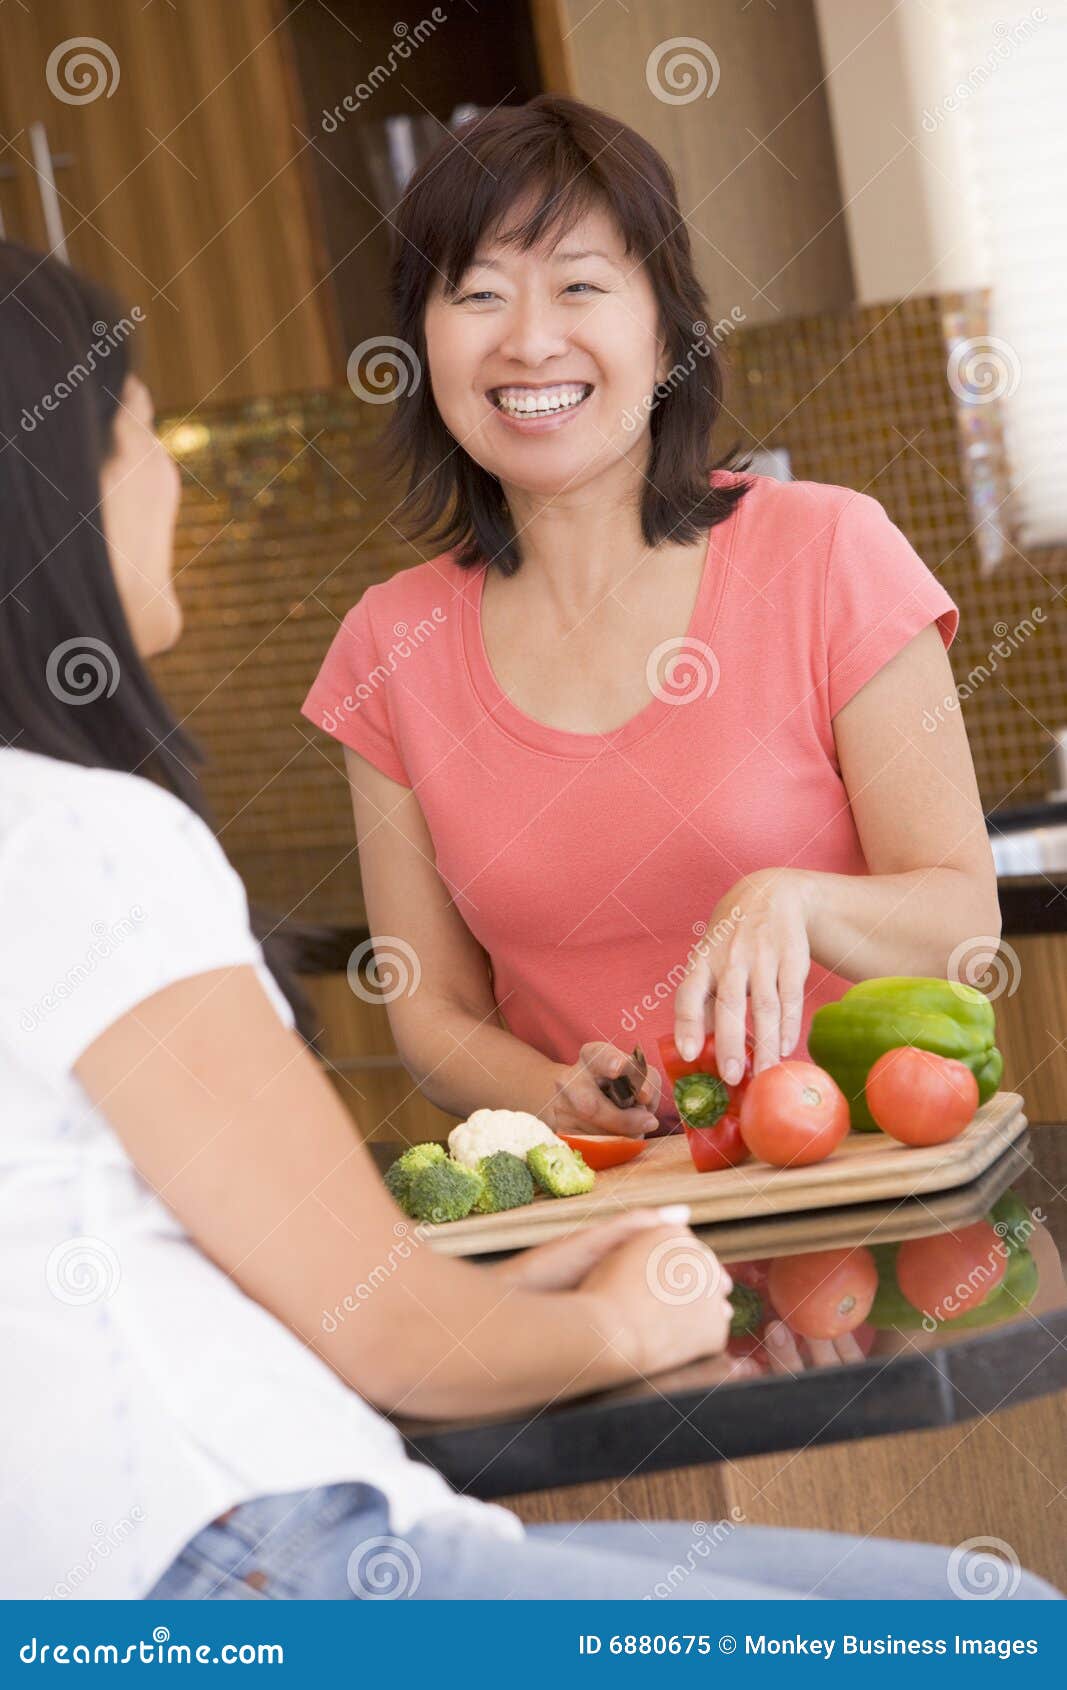 woman chatting to friend while preparing meal